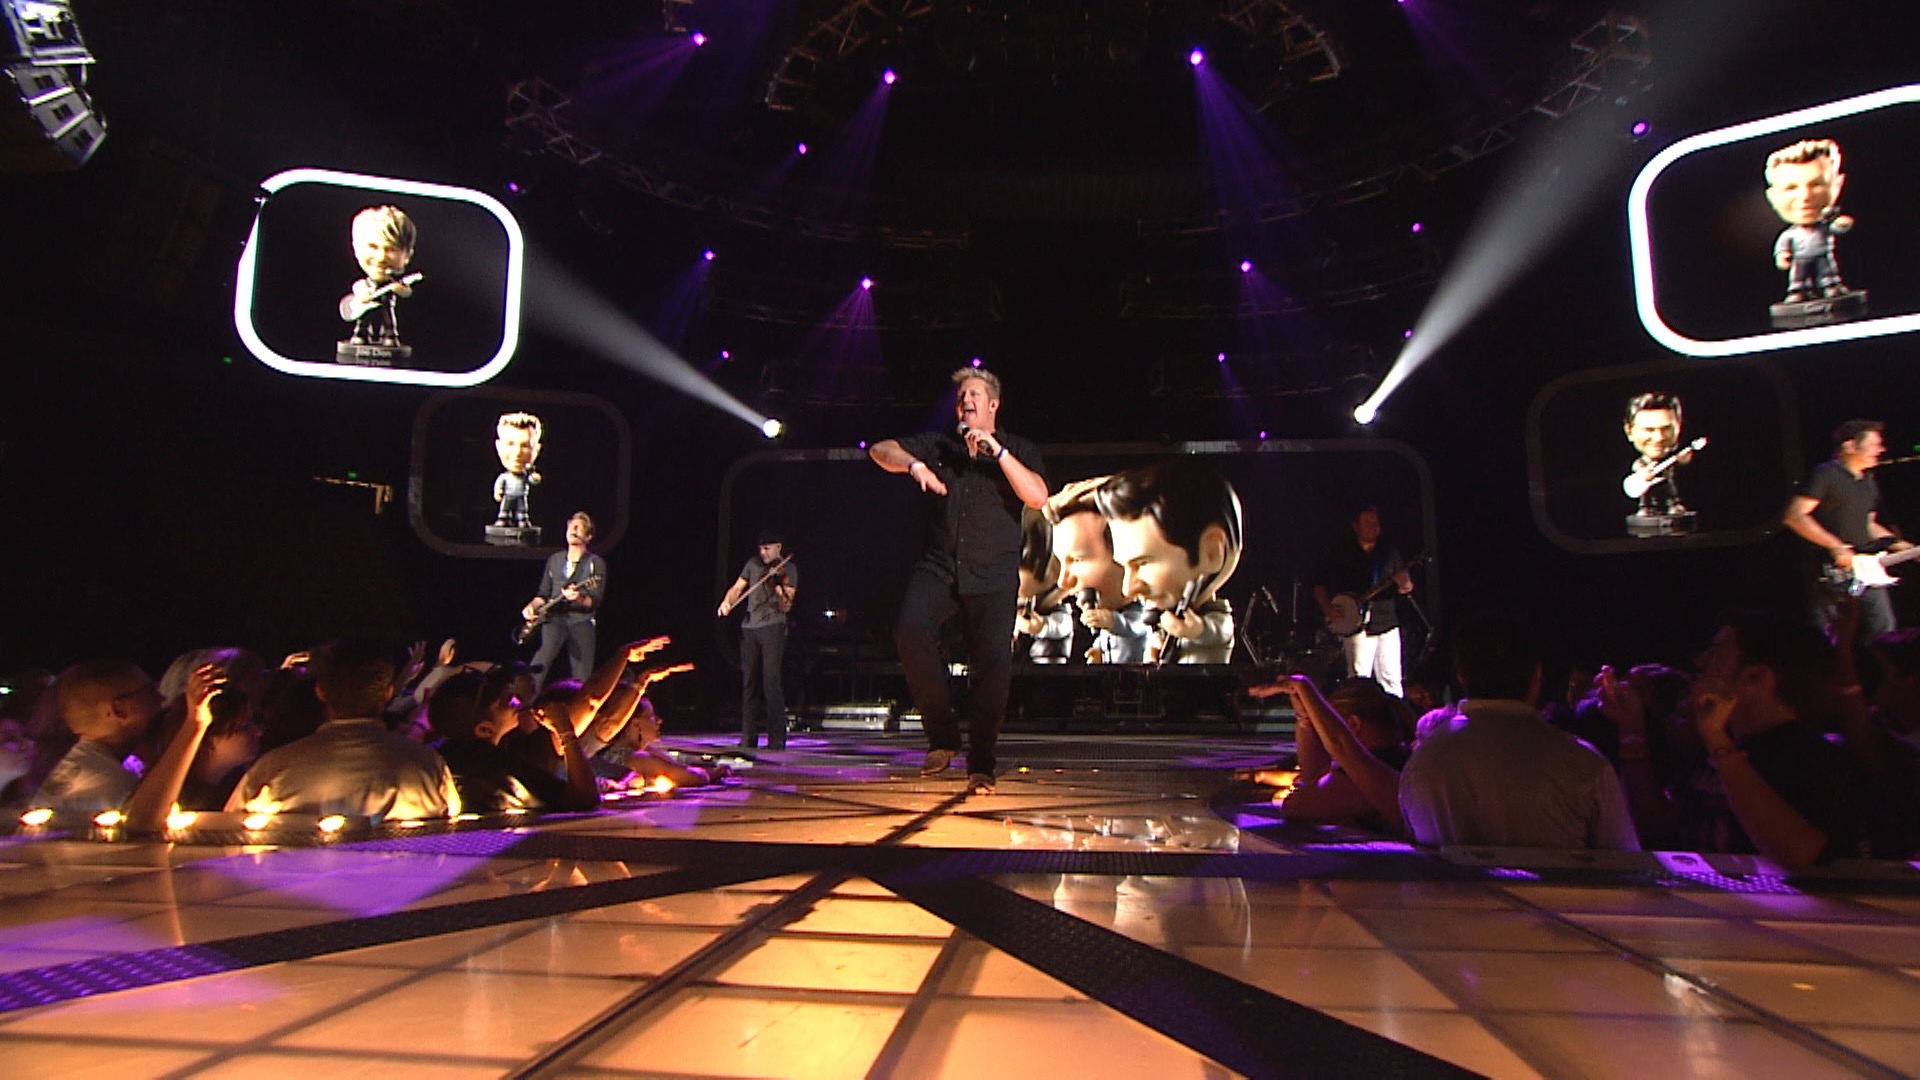 Rascal Flatts performing live, with Bobble Head graphics.